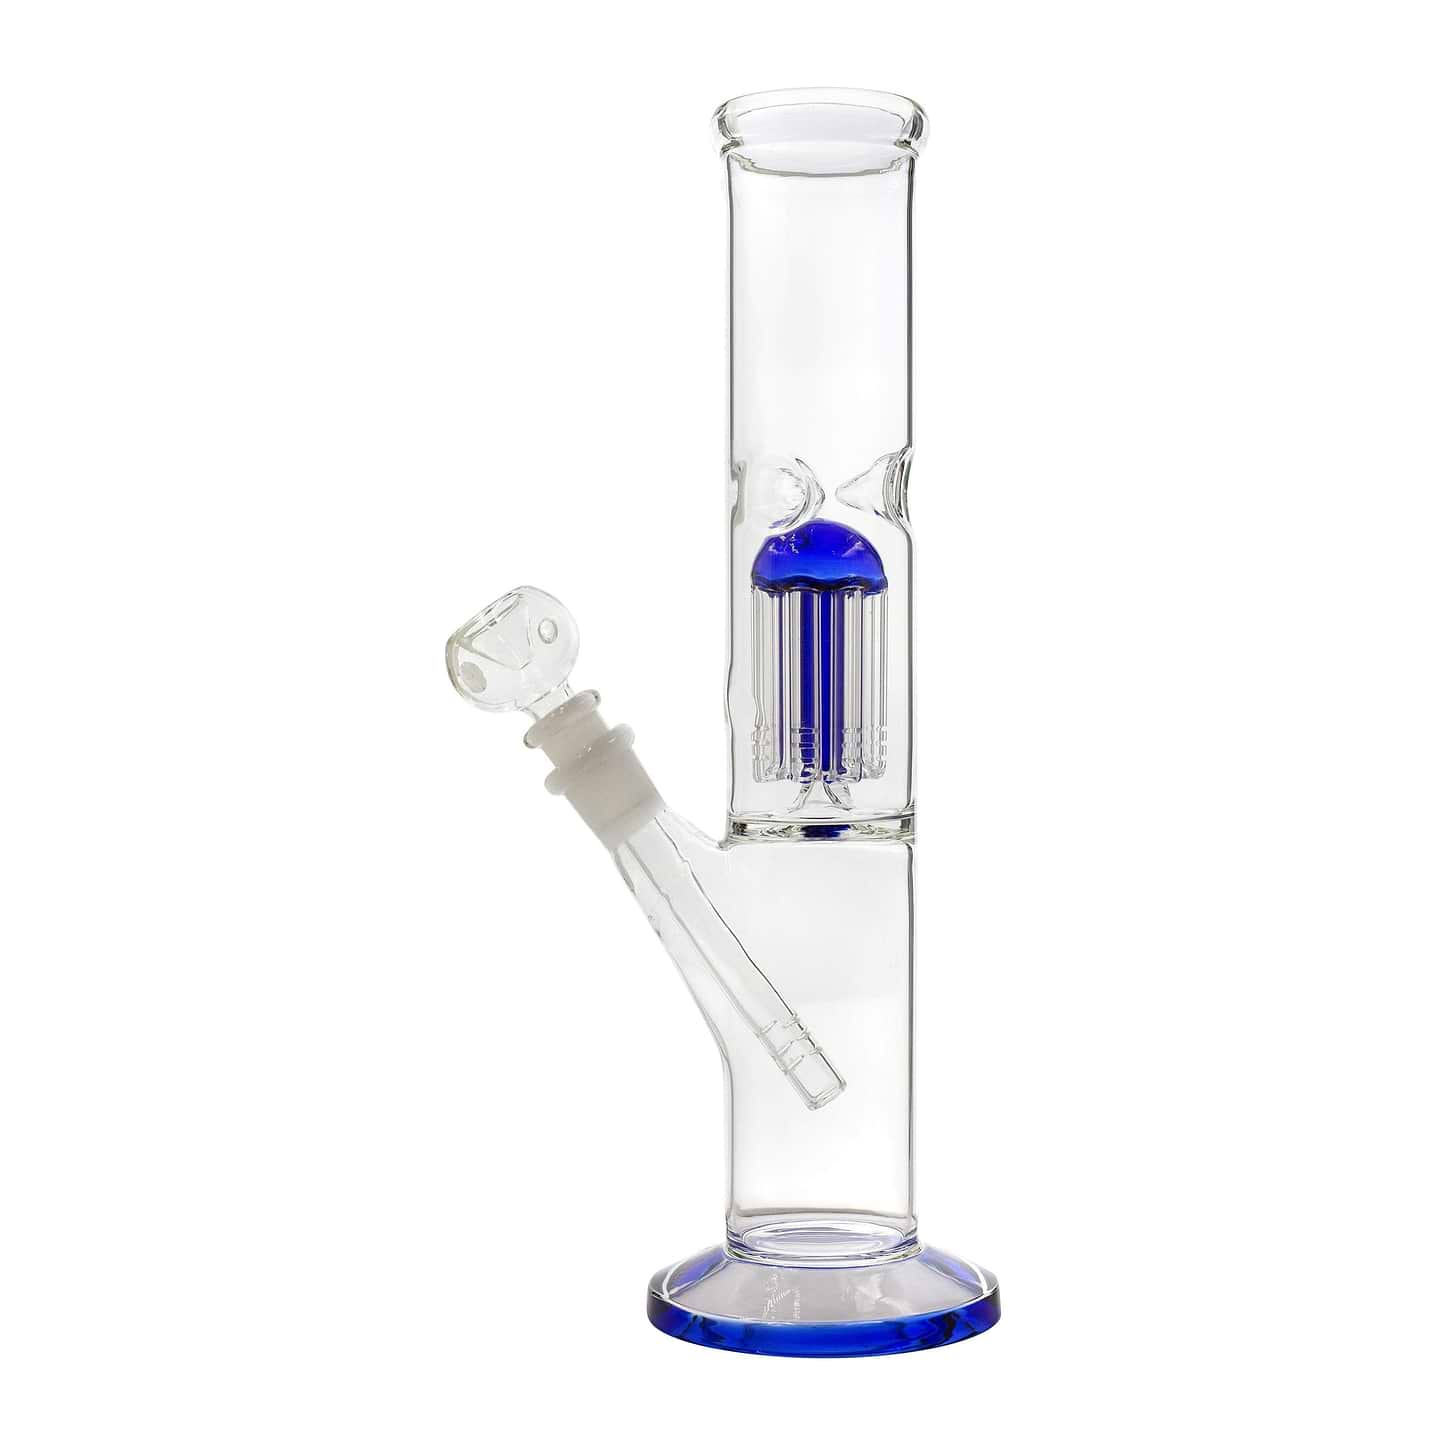 12.5-inch glass bong smoking device with cute jellyfish perc removable downstem large volume tube